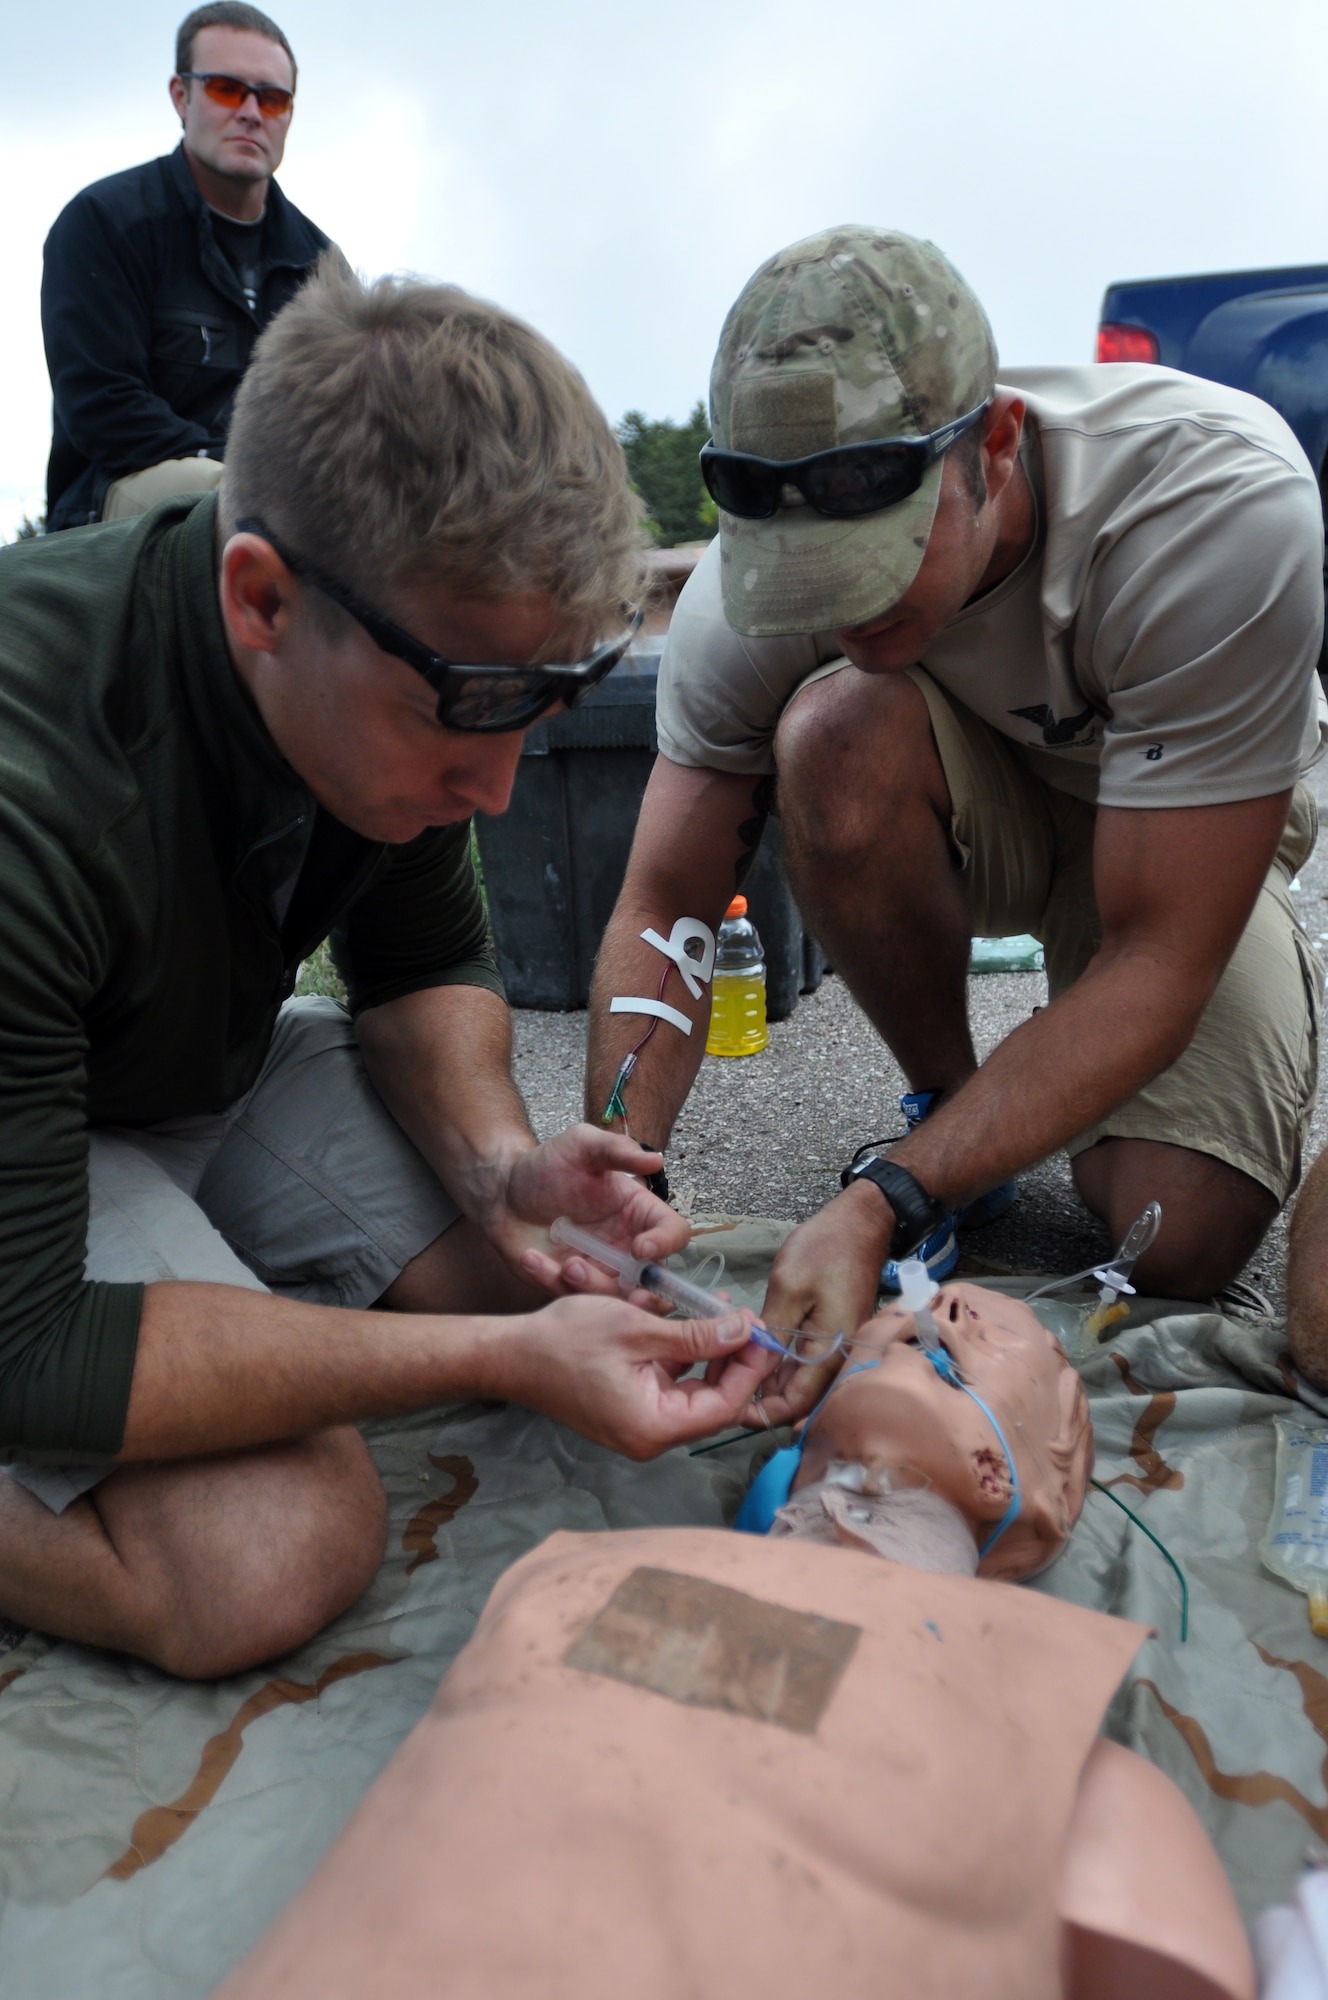 Two pararescuemen administer medical attention to simulated patient during the 2014 Guardian Angel Rodeo, Albuquerque, New Mexico, September 26, 2014. The rodeo, or competition, was a week-long event that tested the PJs on land navigation skills, high-angel rope rescues, survival techniques, medical skills, weapons operations and overall physical endurance. (U.S. Air Force photo/ Tech. Sgt. Katie Spencer)